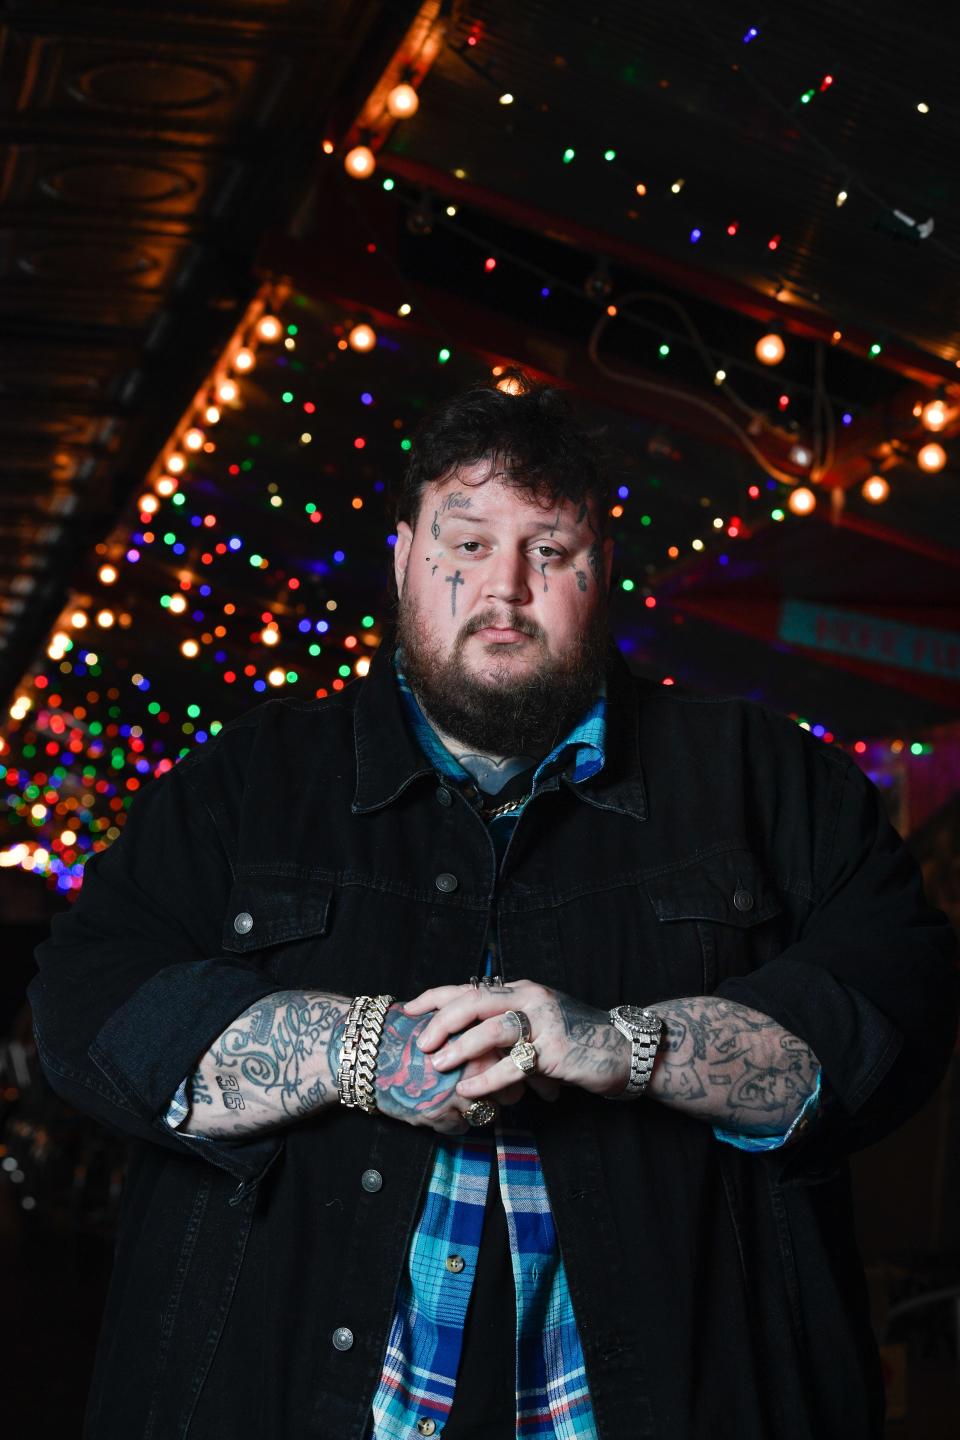 Jellyroll visits Tin Roof, Tuesday, April 12, 2022, in Nashville where he cut his teeth as a new artist from rapping to country radio. 'Jelly' is also launching a new concert at Bridgestone Arena to benefit at-risk youth and youth drug recovery. 